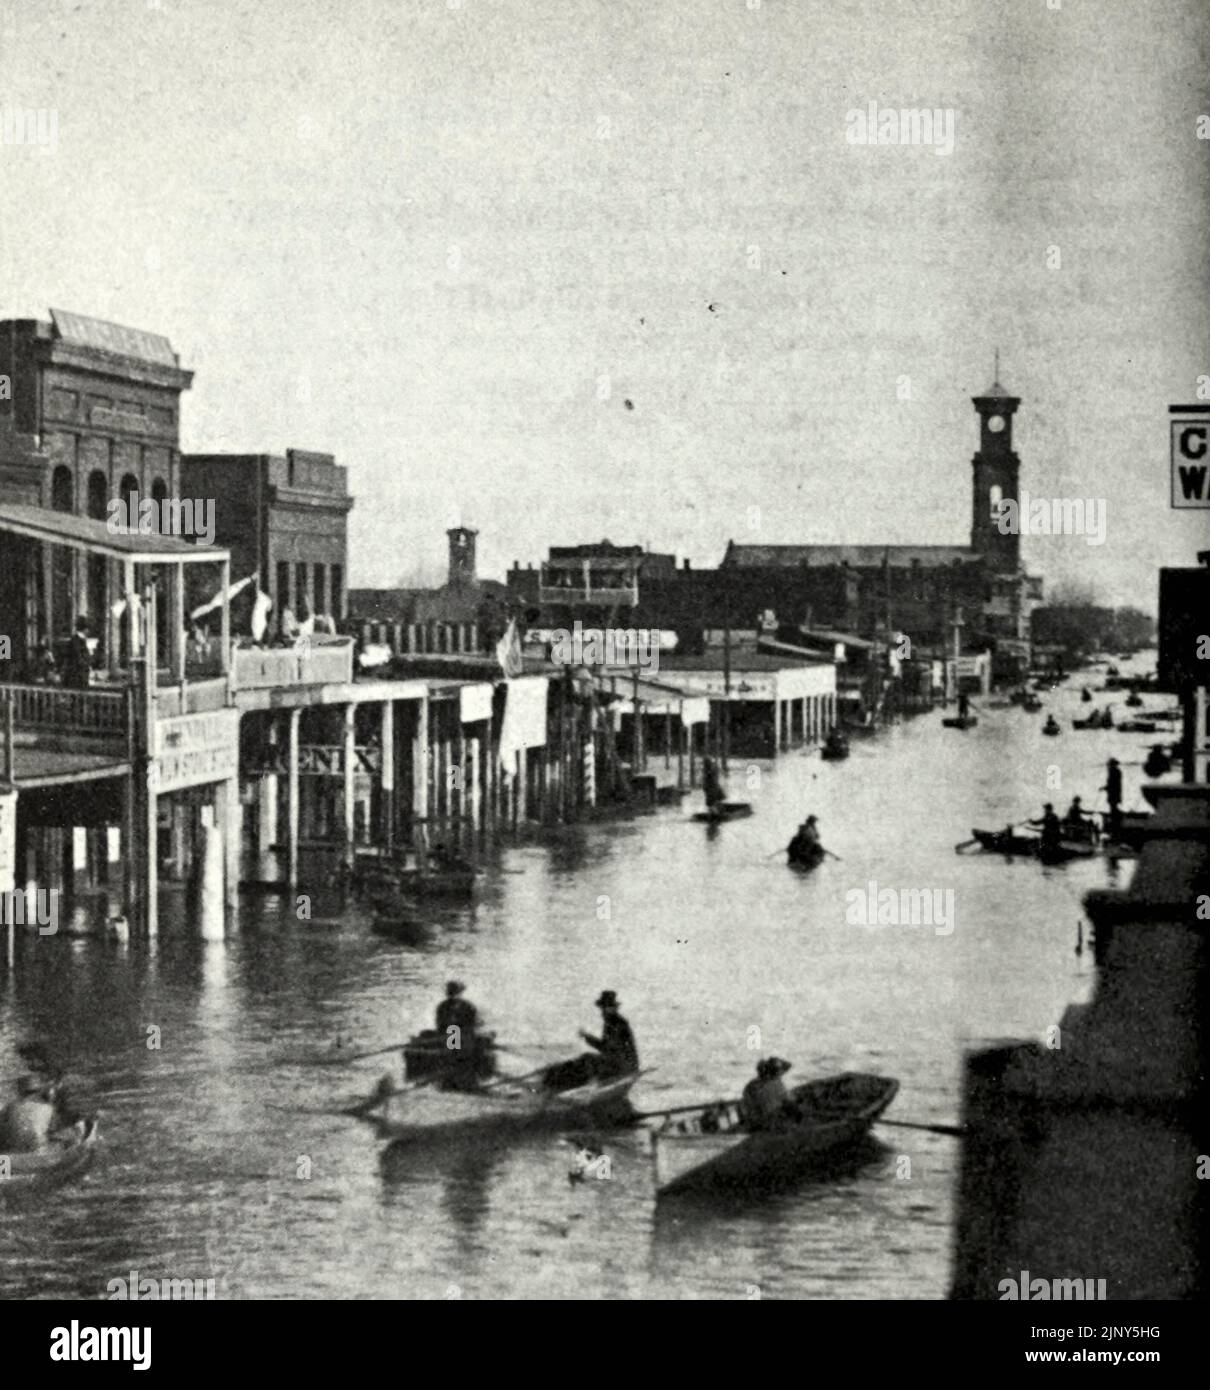 Sacramento City, California, during the Great Flood of 1862 - K Street east from Fourth Street Stock Photo